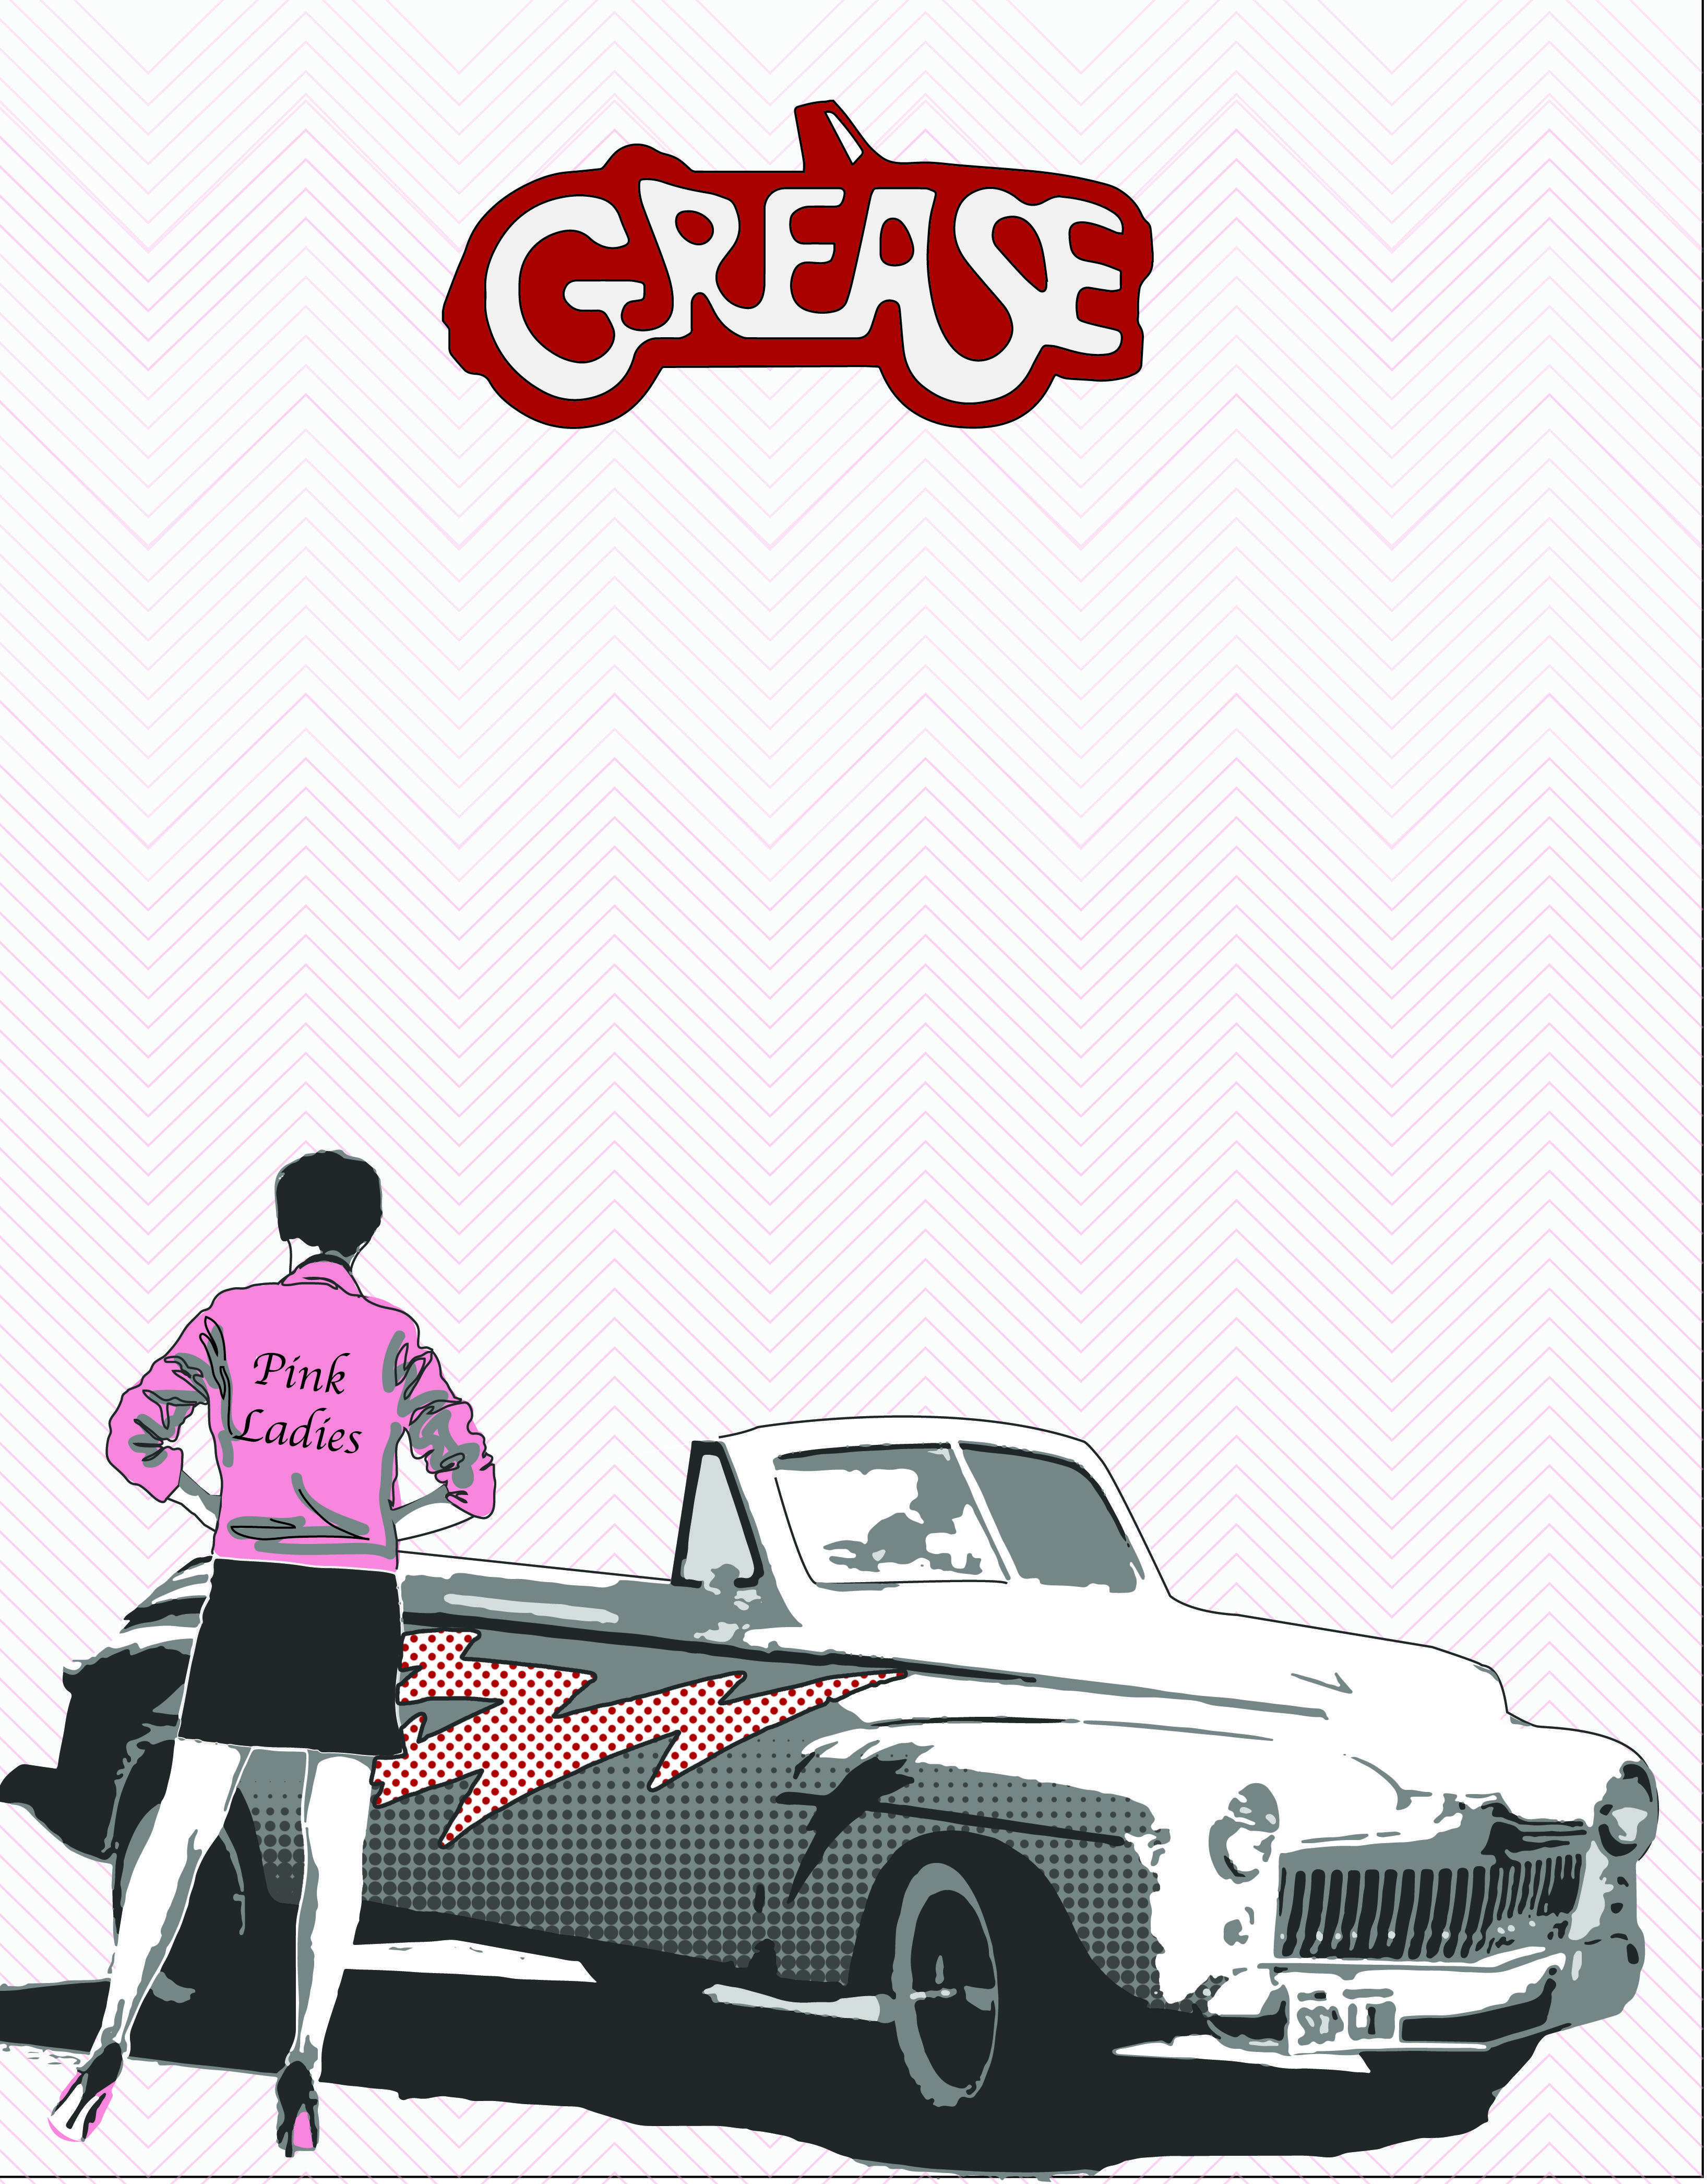 Grease Poster # 3 color then 2 with a very light